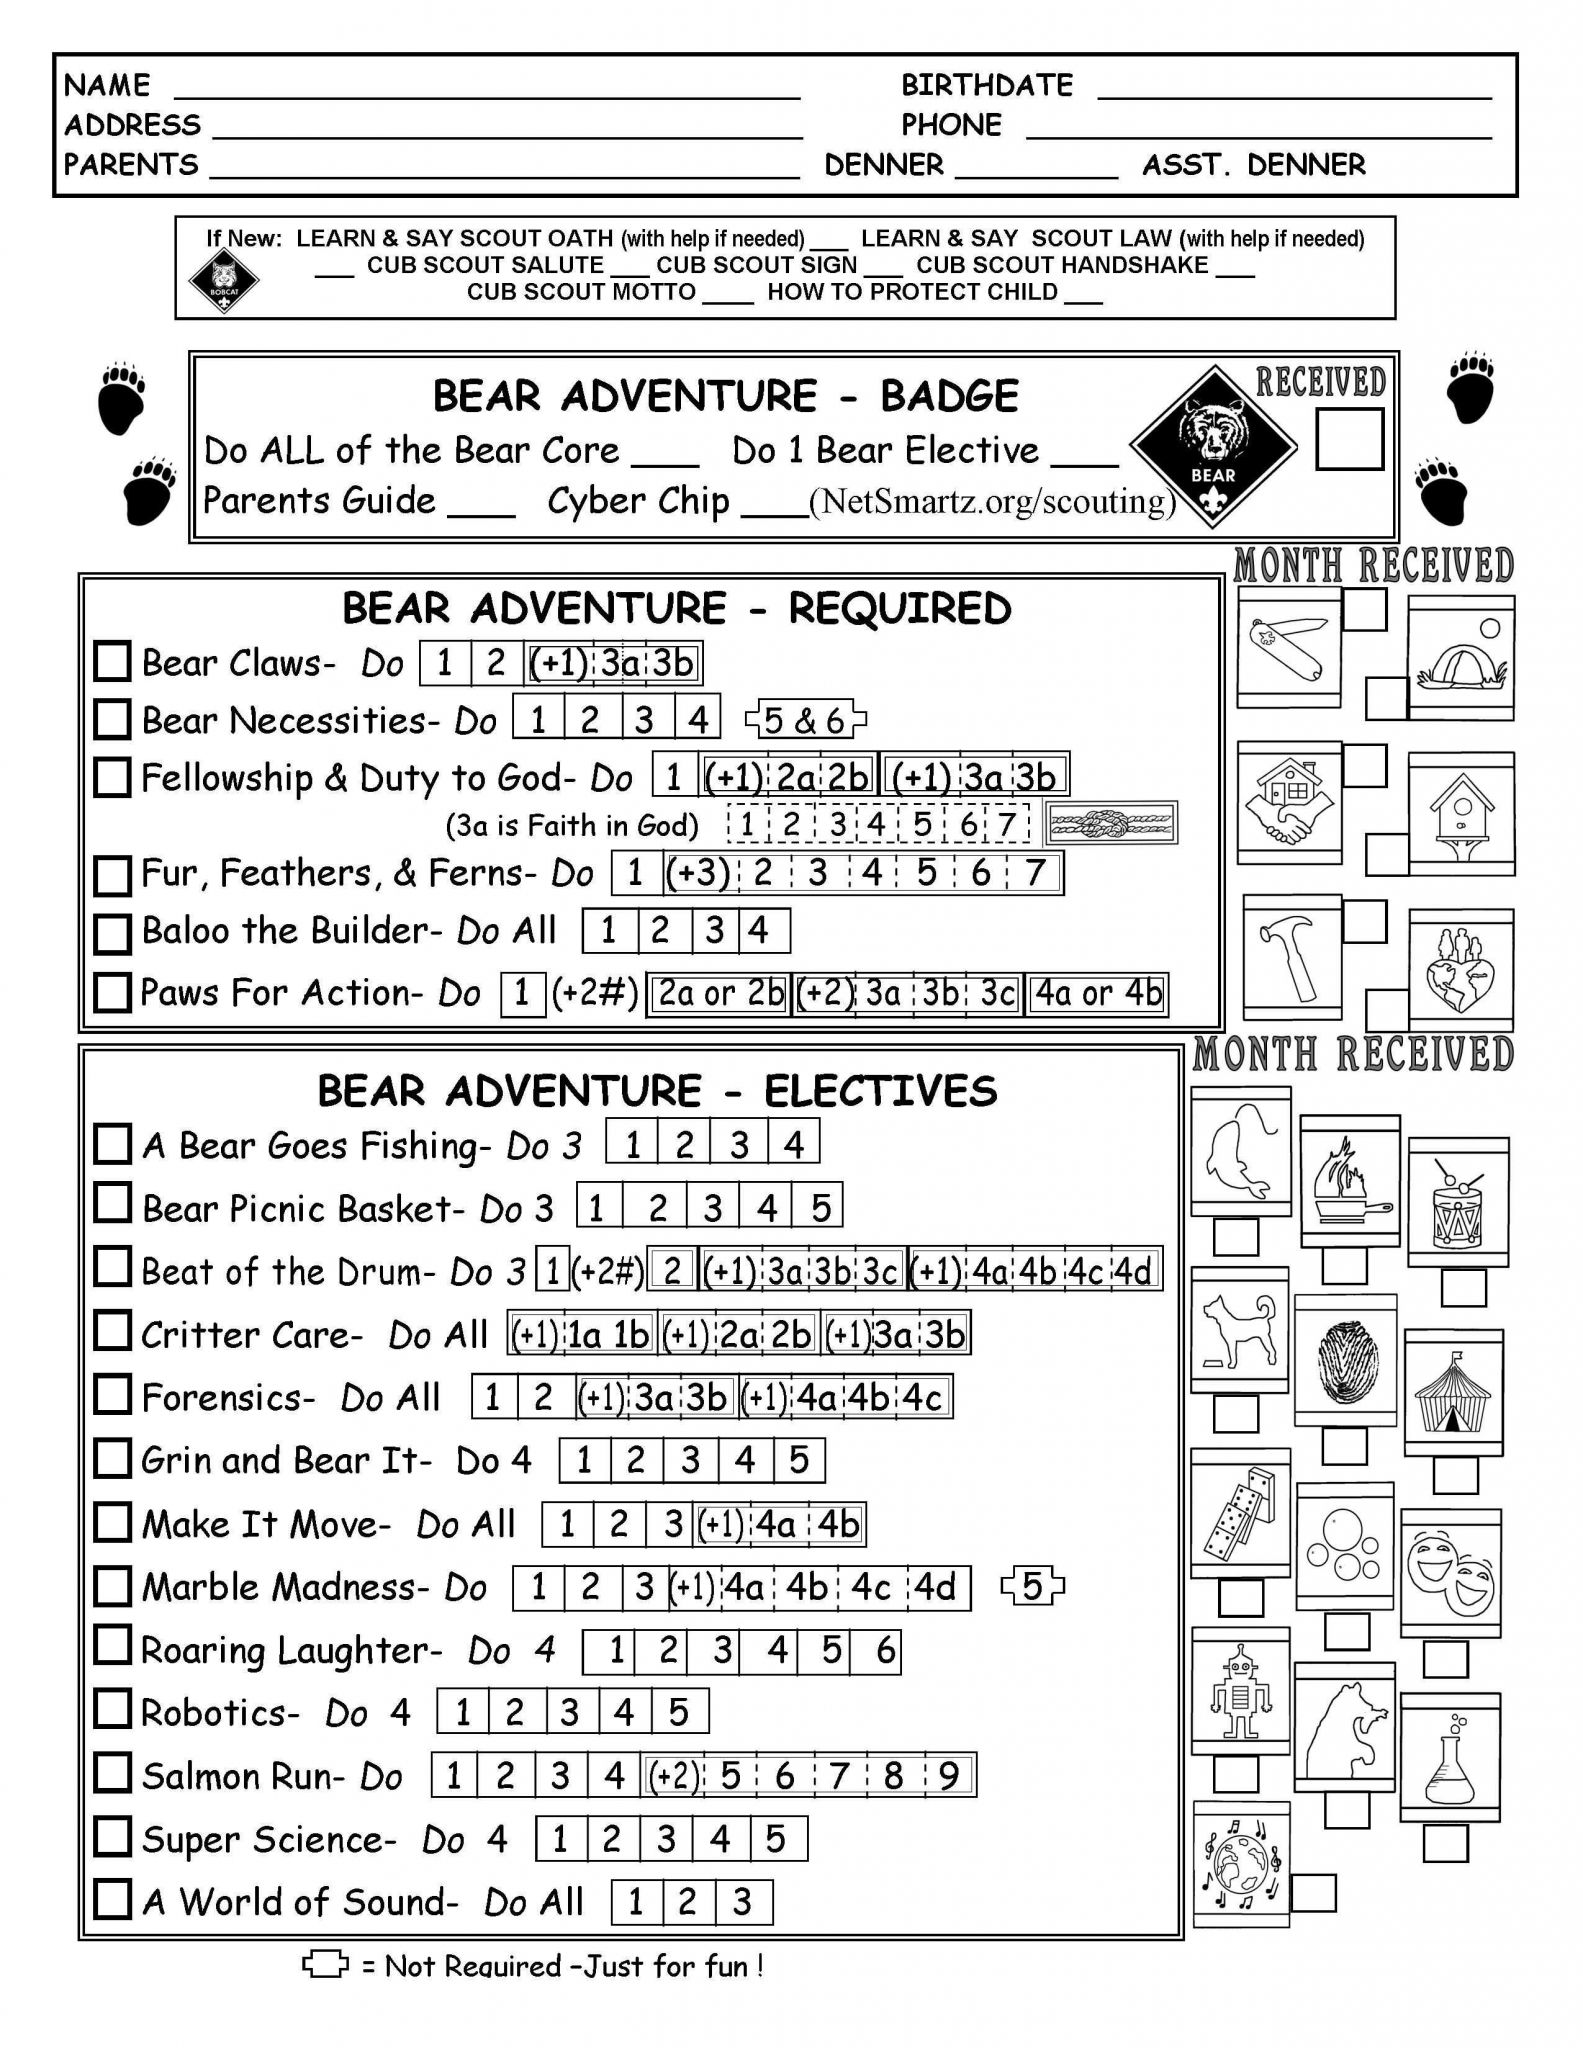 Camping Merit Badge Worksheet 2017 together with Cub Scout Bear Tracking Sheet Record with the New Modified